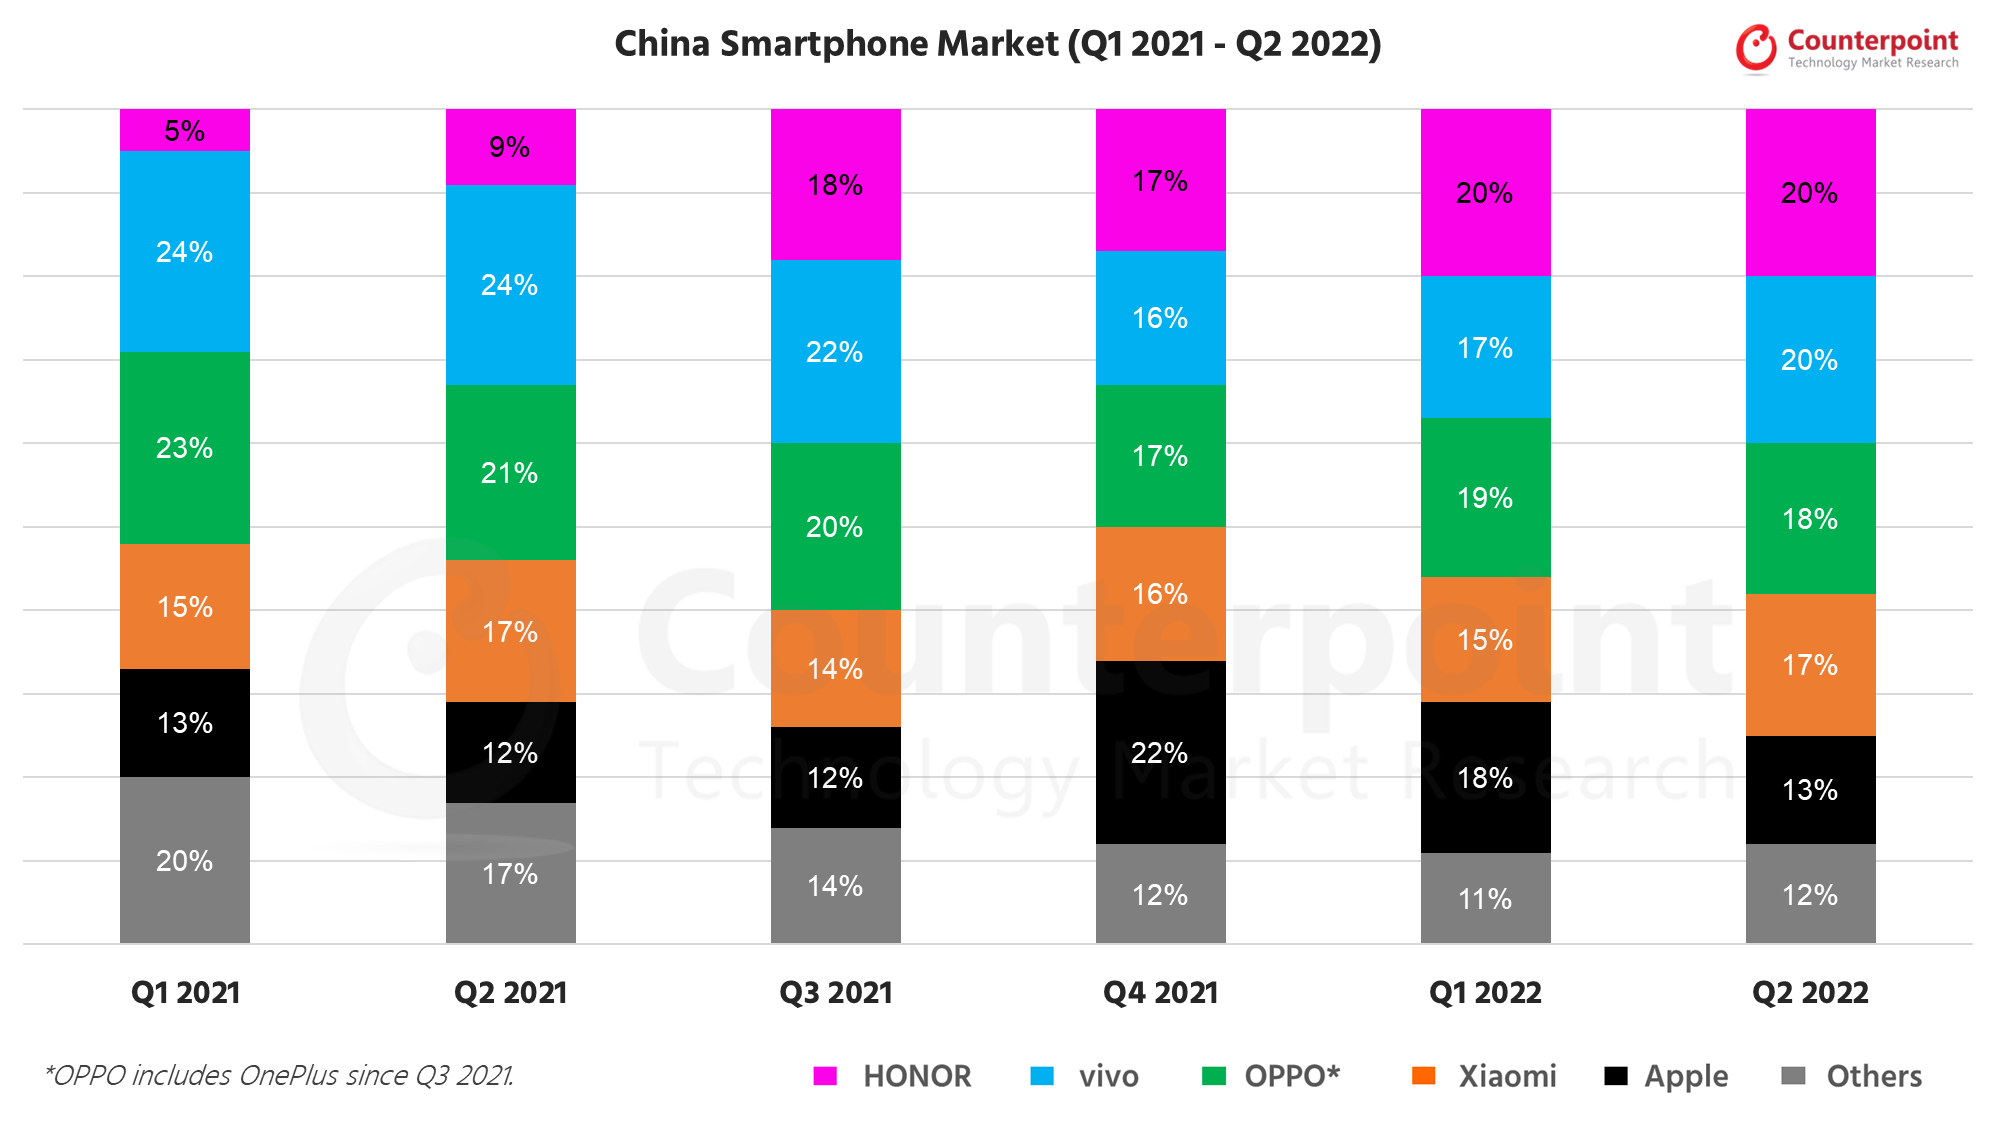 Counterpoint Research China Smartphone Market Q2 2022 1